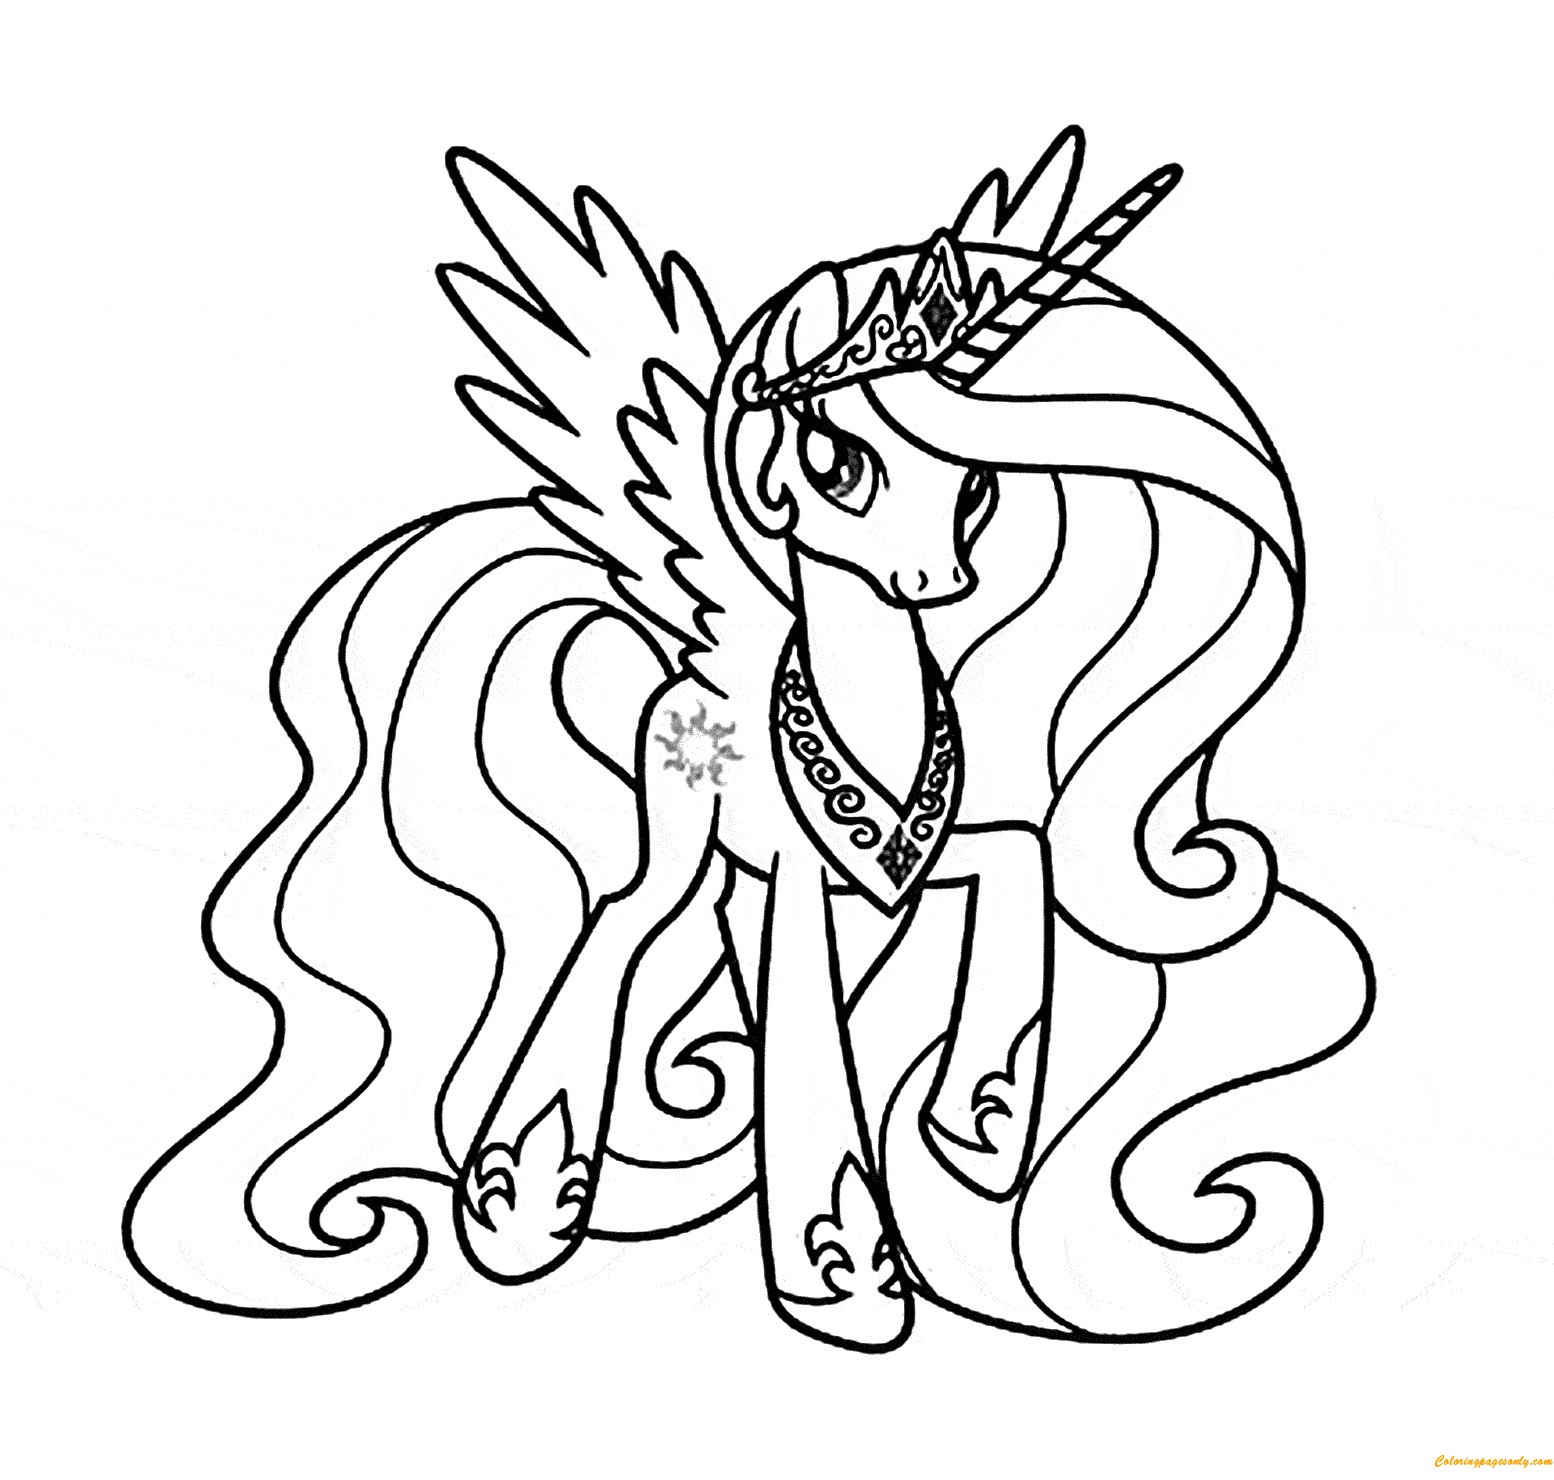 My Little Pony Coloring Pages Princess Celestia at GetColorings.com